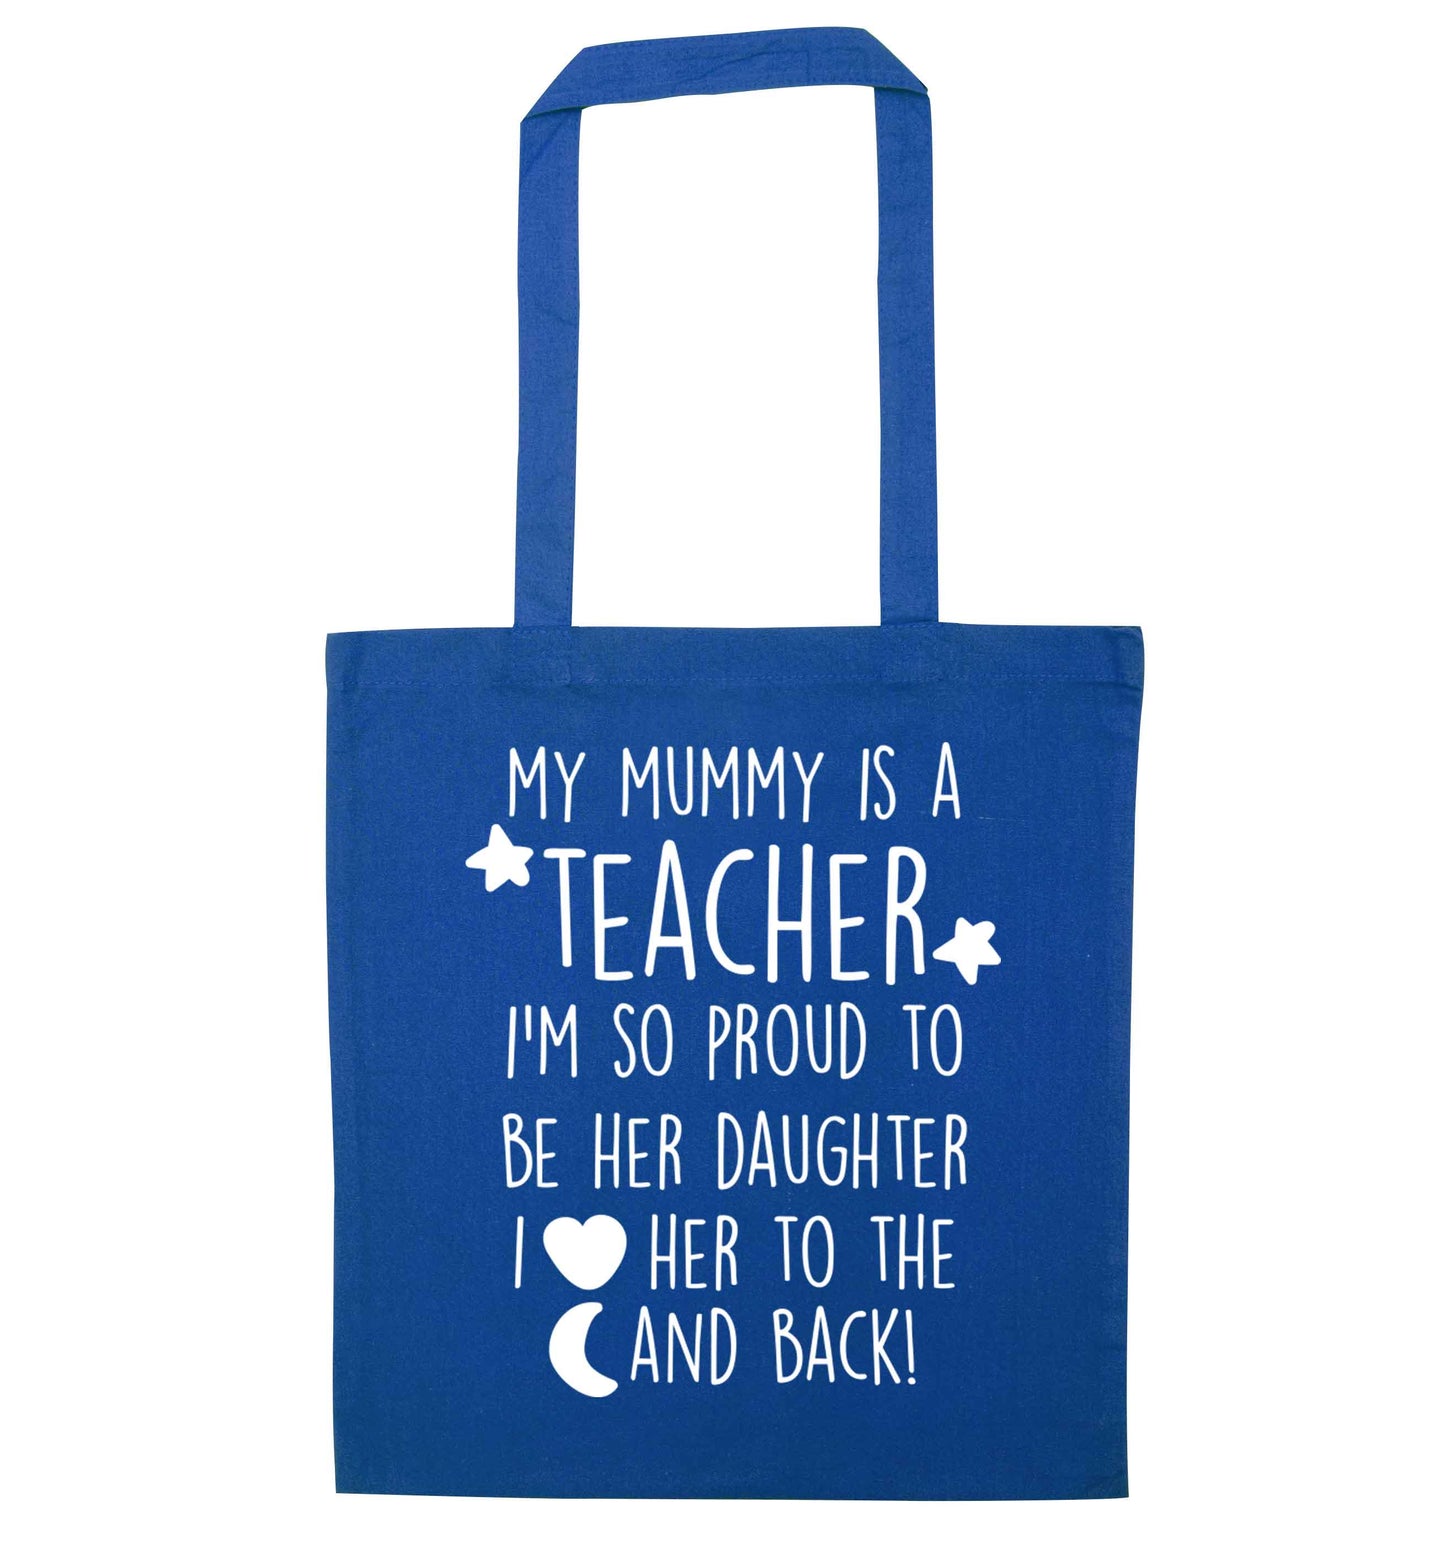 My mummy is a teacher I'm so proud to be her daughter I love her to the moon and back blue tote bag